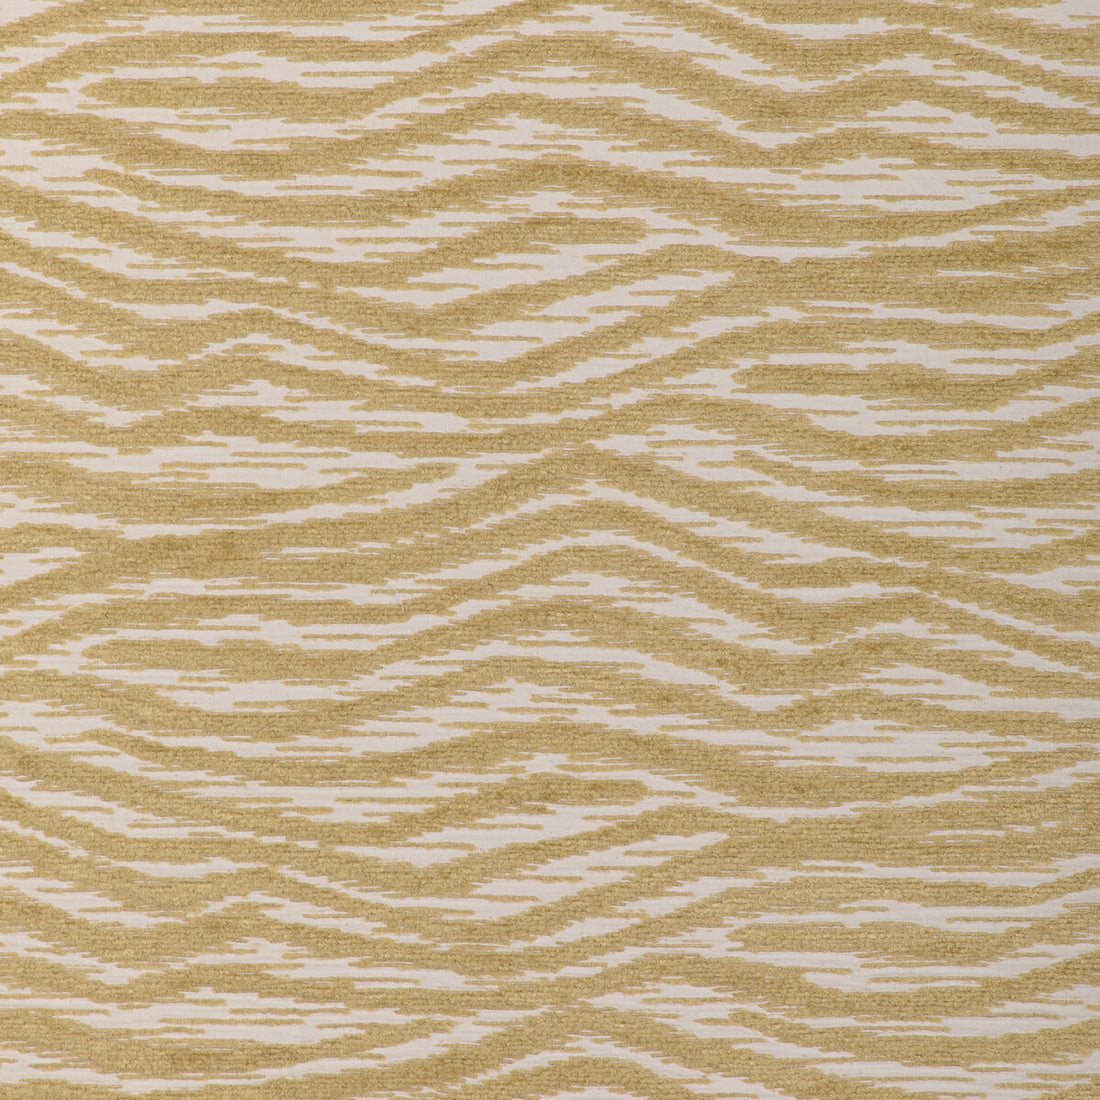 Tuscan Ripples fabric in wheat color - pattern 36899.16.0 - by Kravet Couture in the Atelier Weaves collection